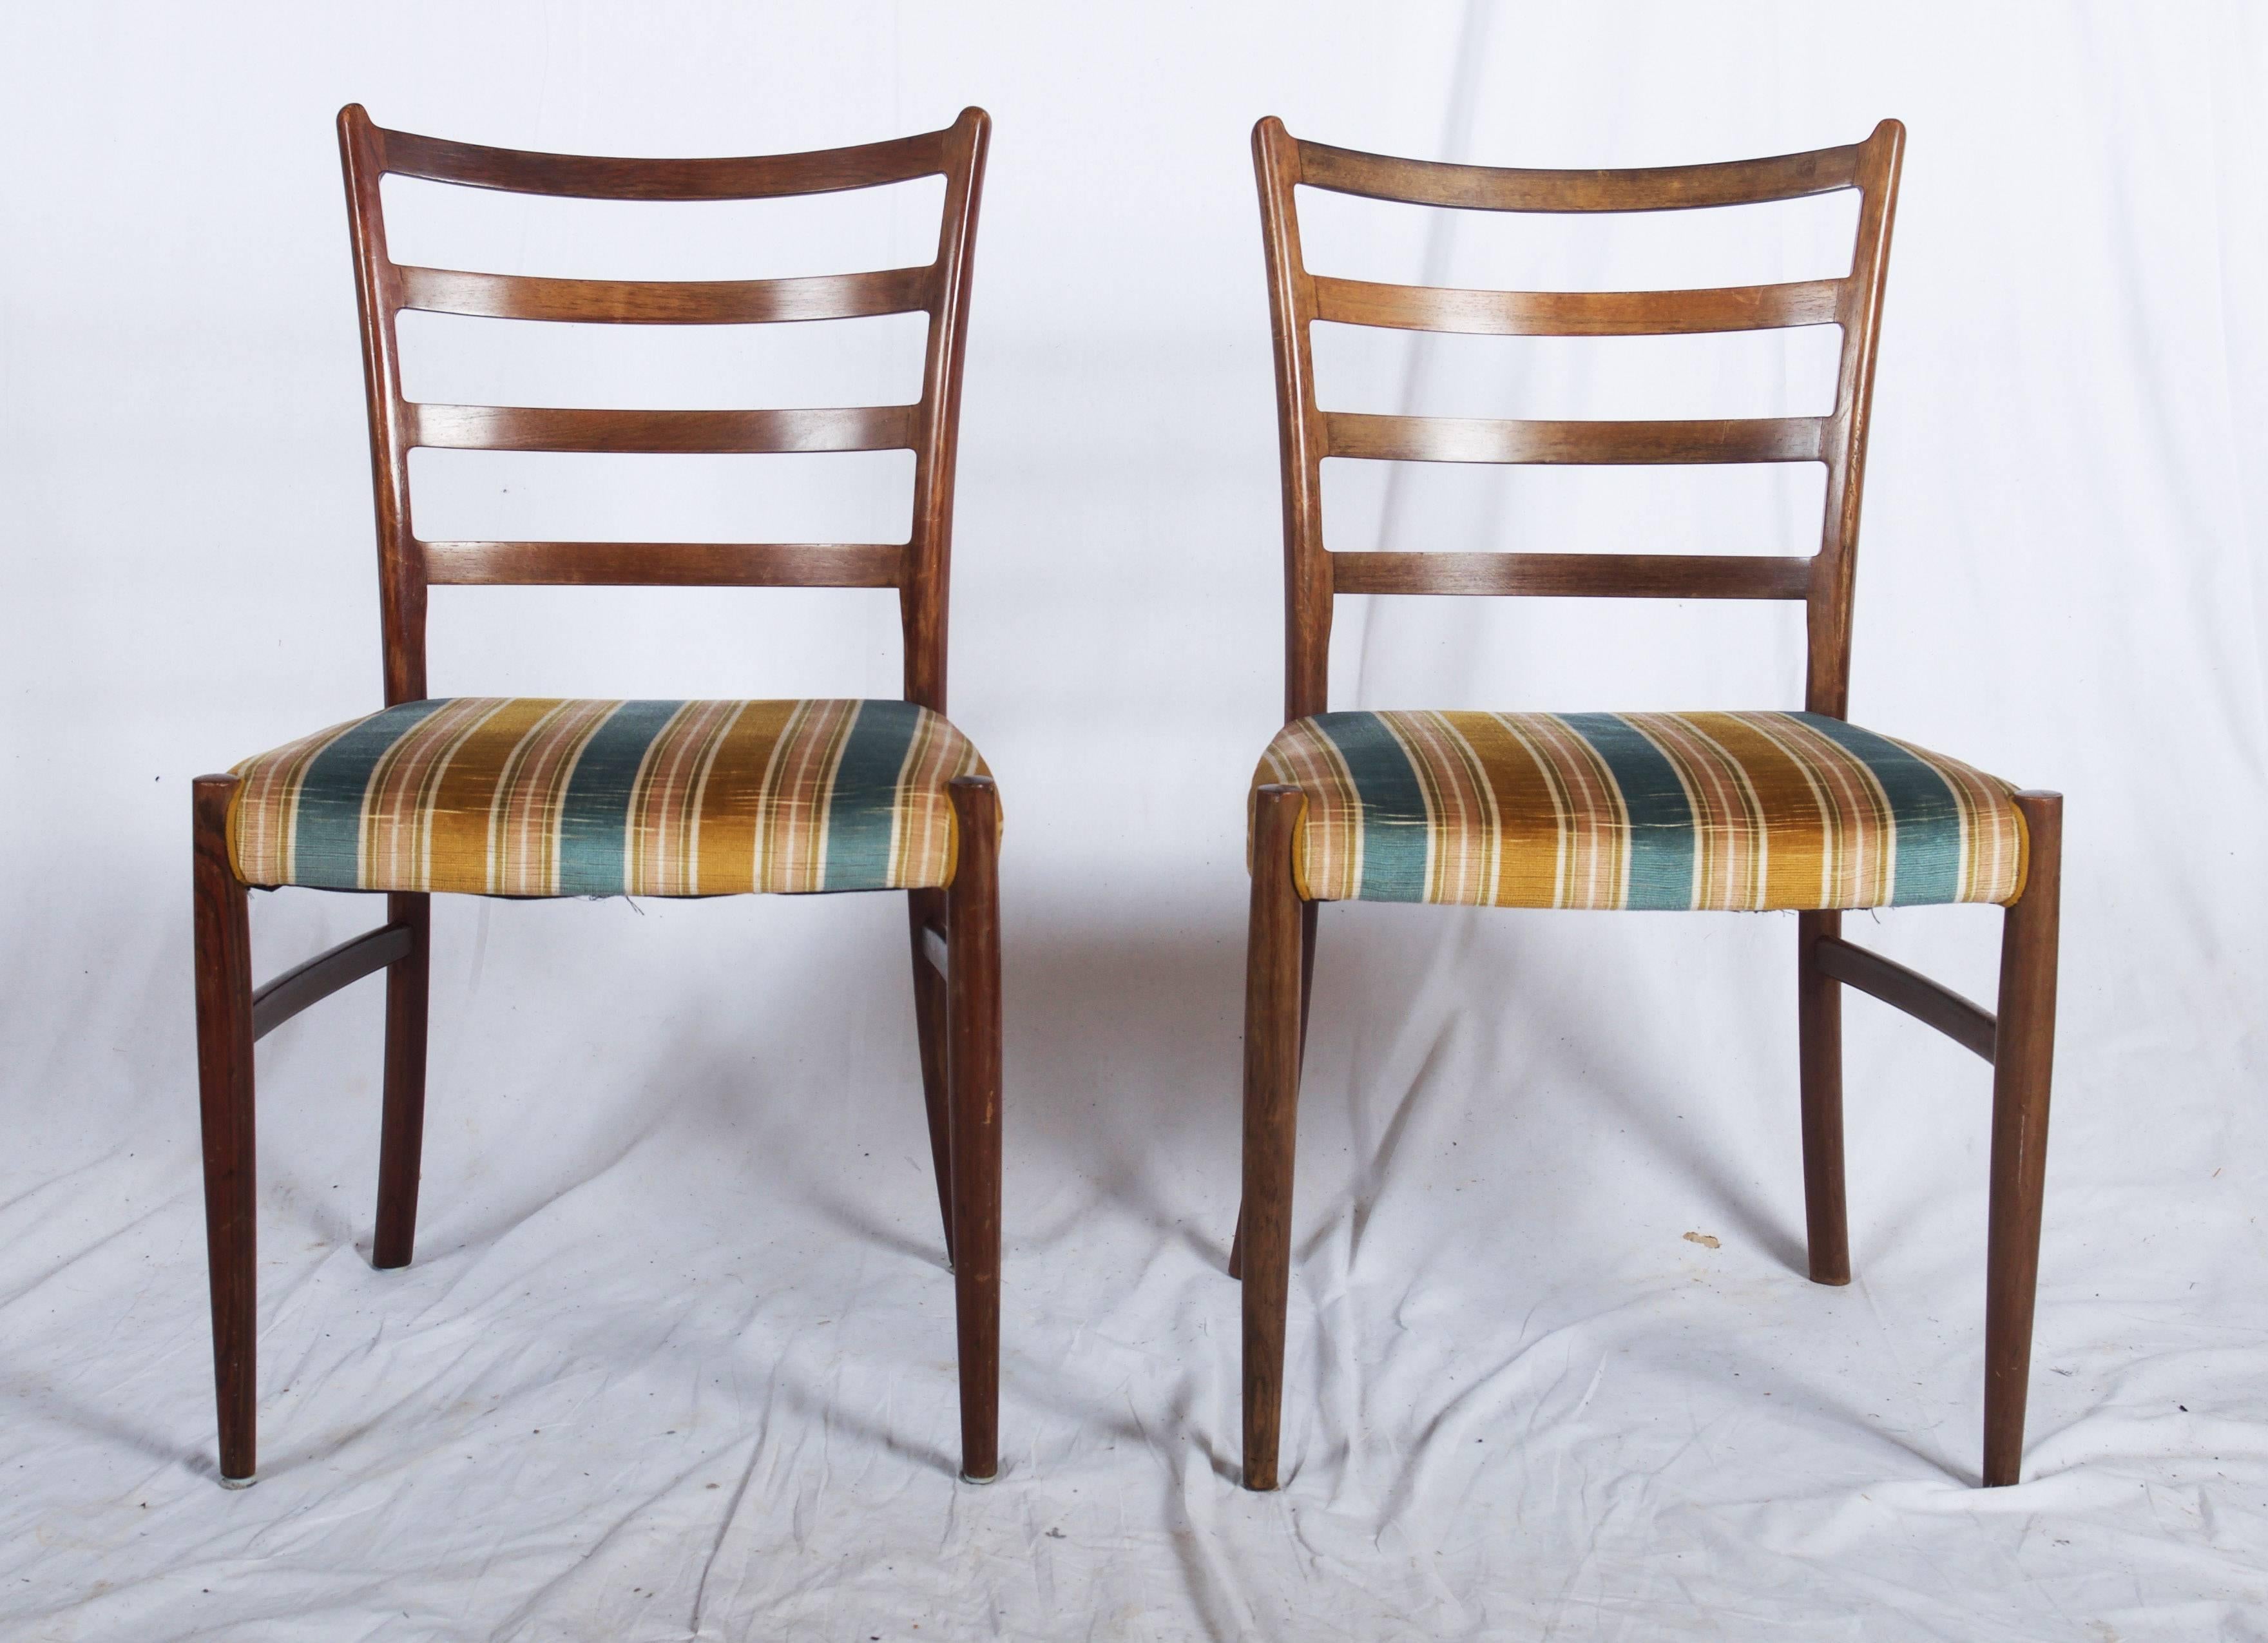 A set of four dining chairs designed by Johannes Andersen and produced by SVA Møbler, Denmark, circa 1960, in solid hardwood. These chairs are all in excellent condition and the hardwood of a warm honey color.
Or request we can also make a new